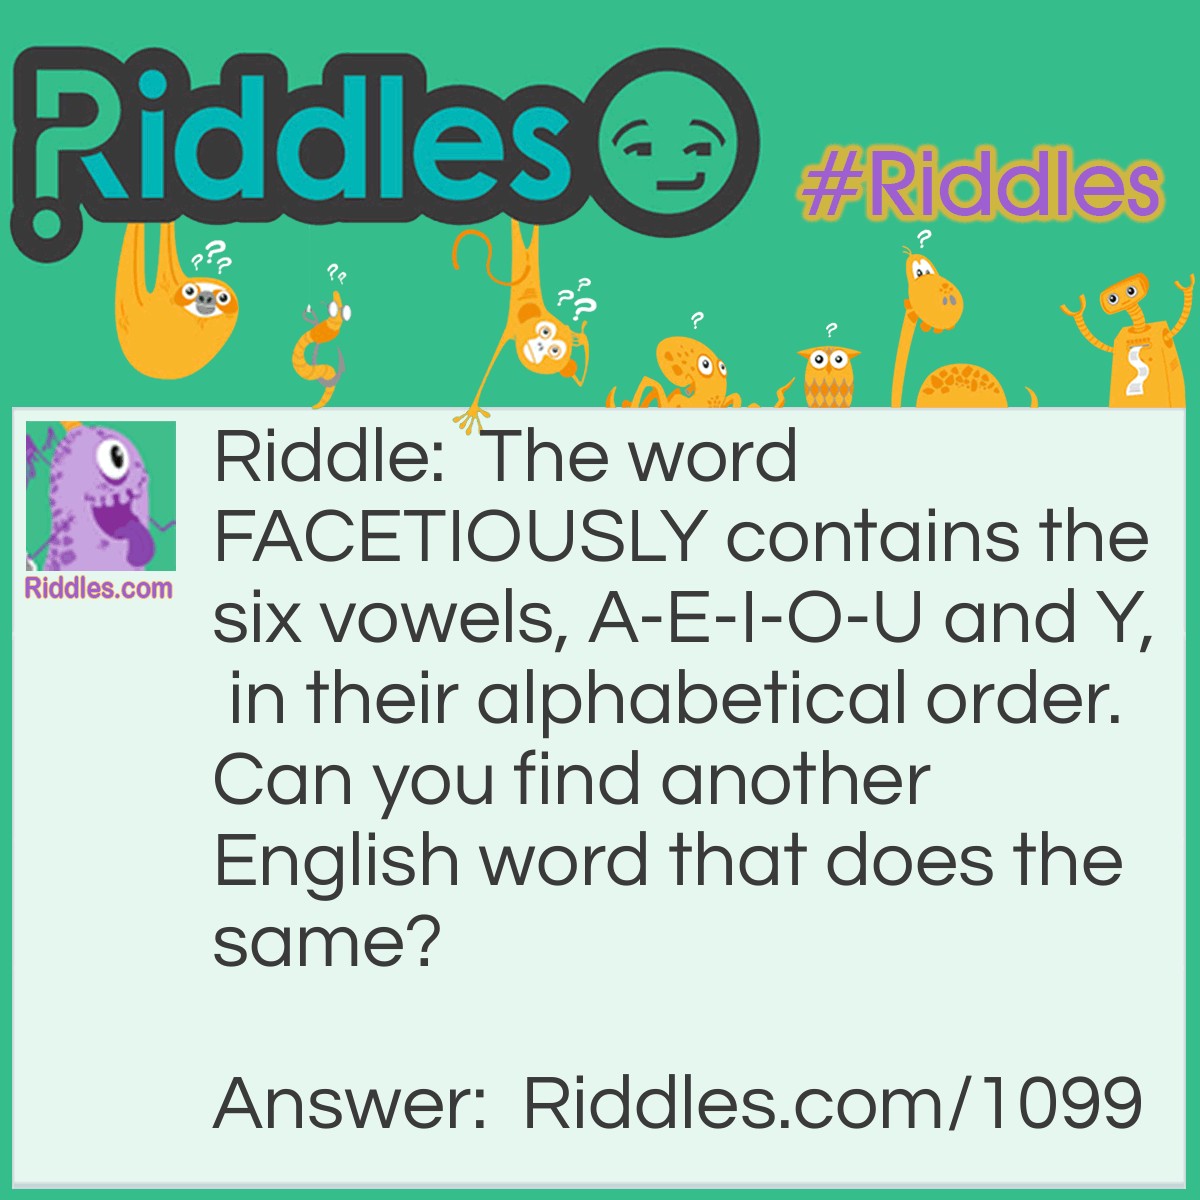 Riddle: The word F<strong>A</strong>C<strong>E</strong>T<strong>IOU</strong>SL<strong>Y</strong> contains the six vowels, A-E-I-O-U and Y,  in their alphabetical order.  Can you find another English word that does the same? Answer: The word is abstemiously. There may be others.